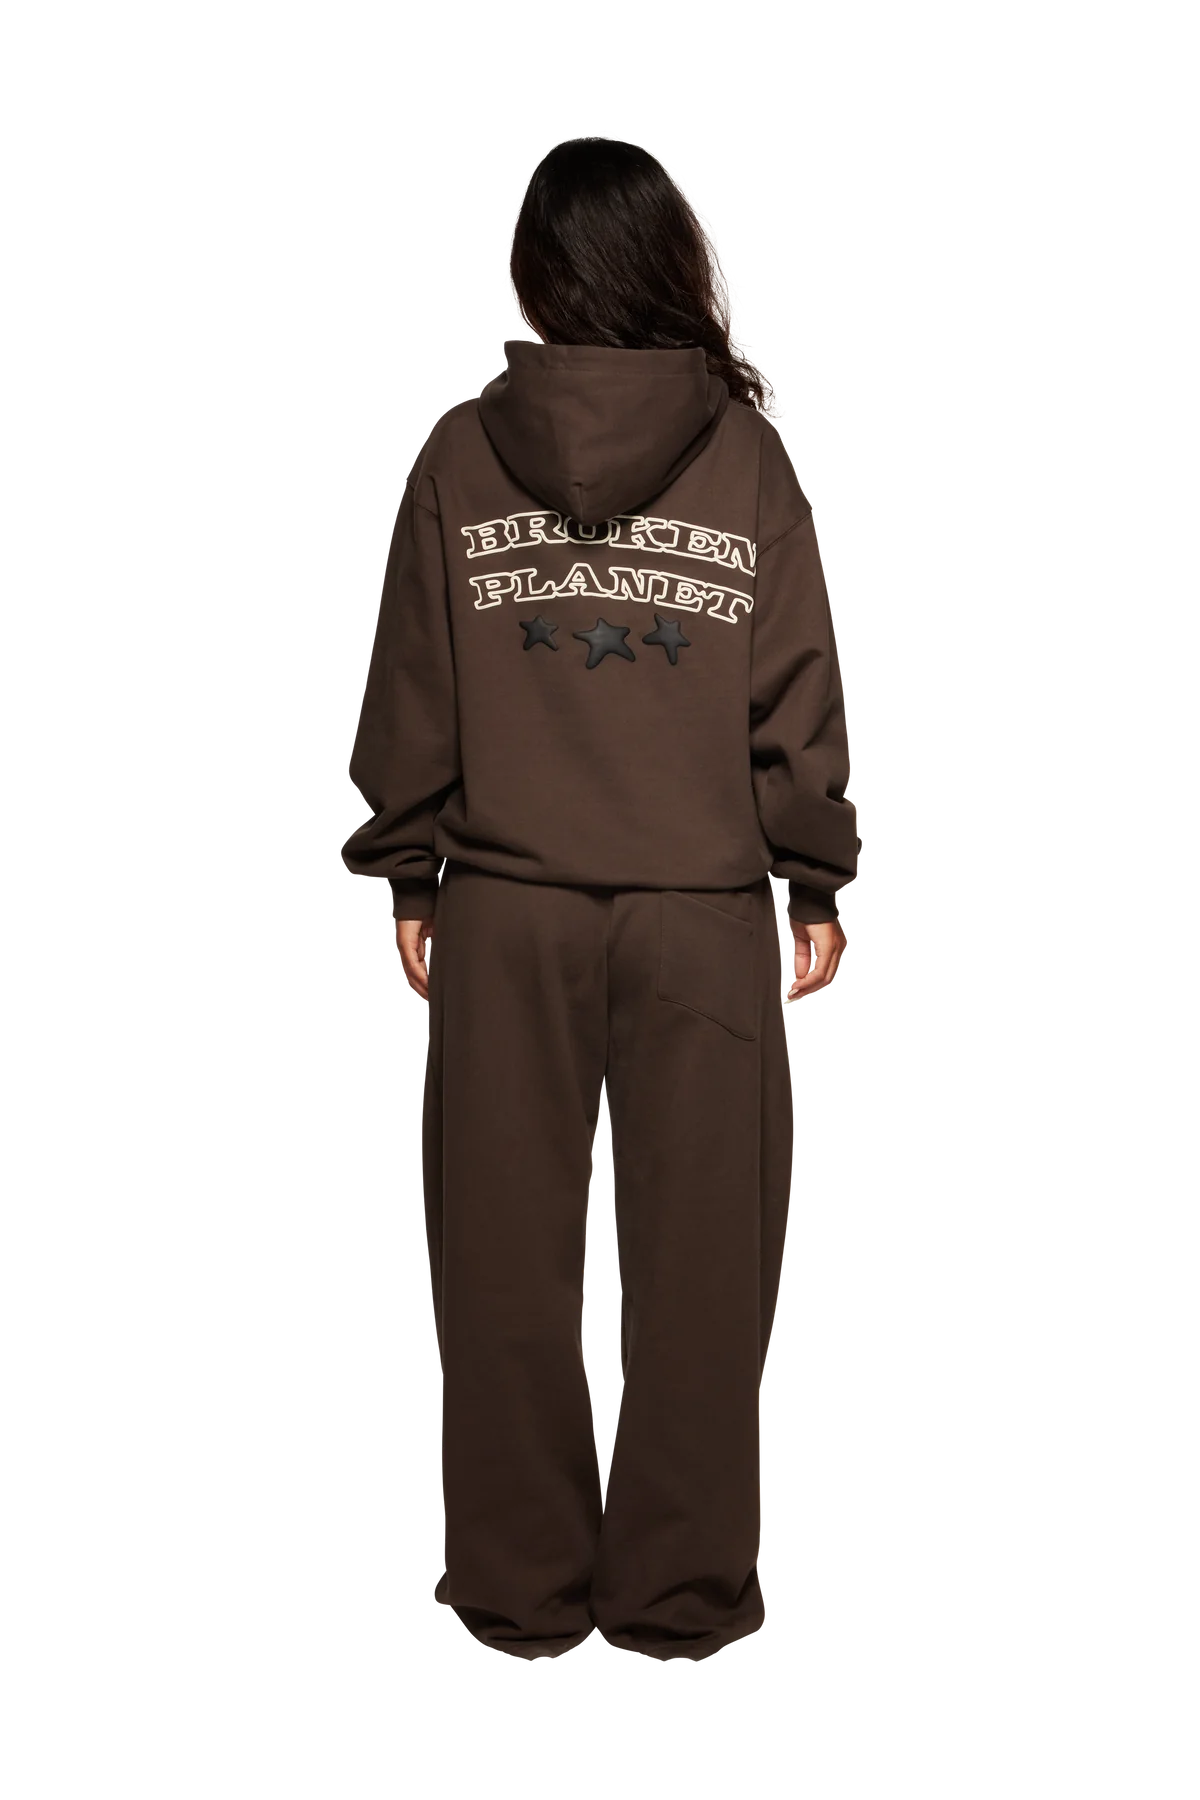 BROKEN PLANET - "OUT OF SERVICE" TRACKSUIT